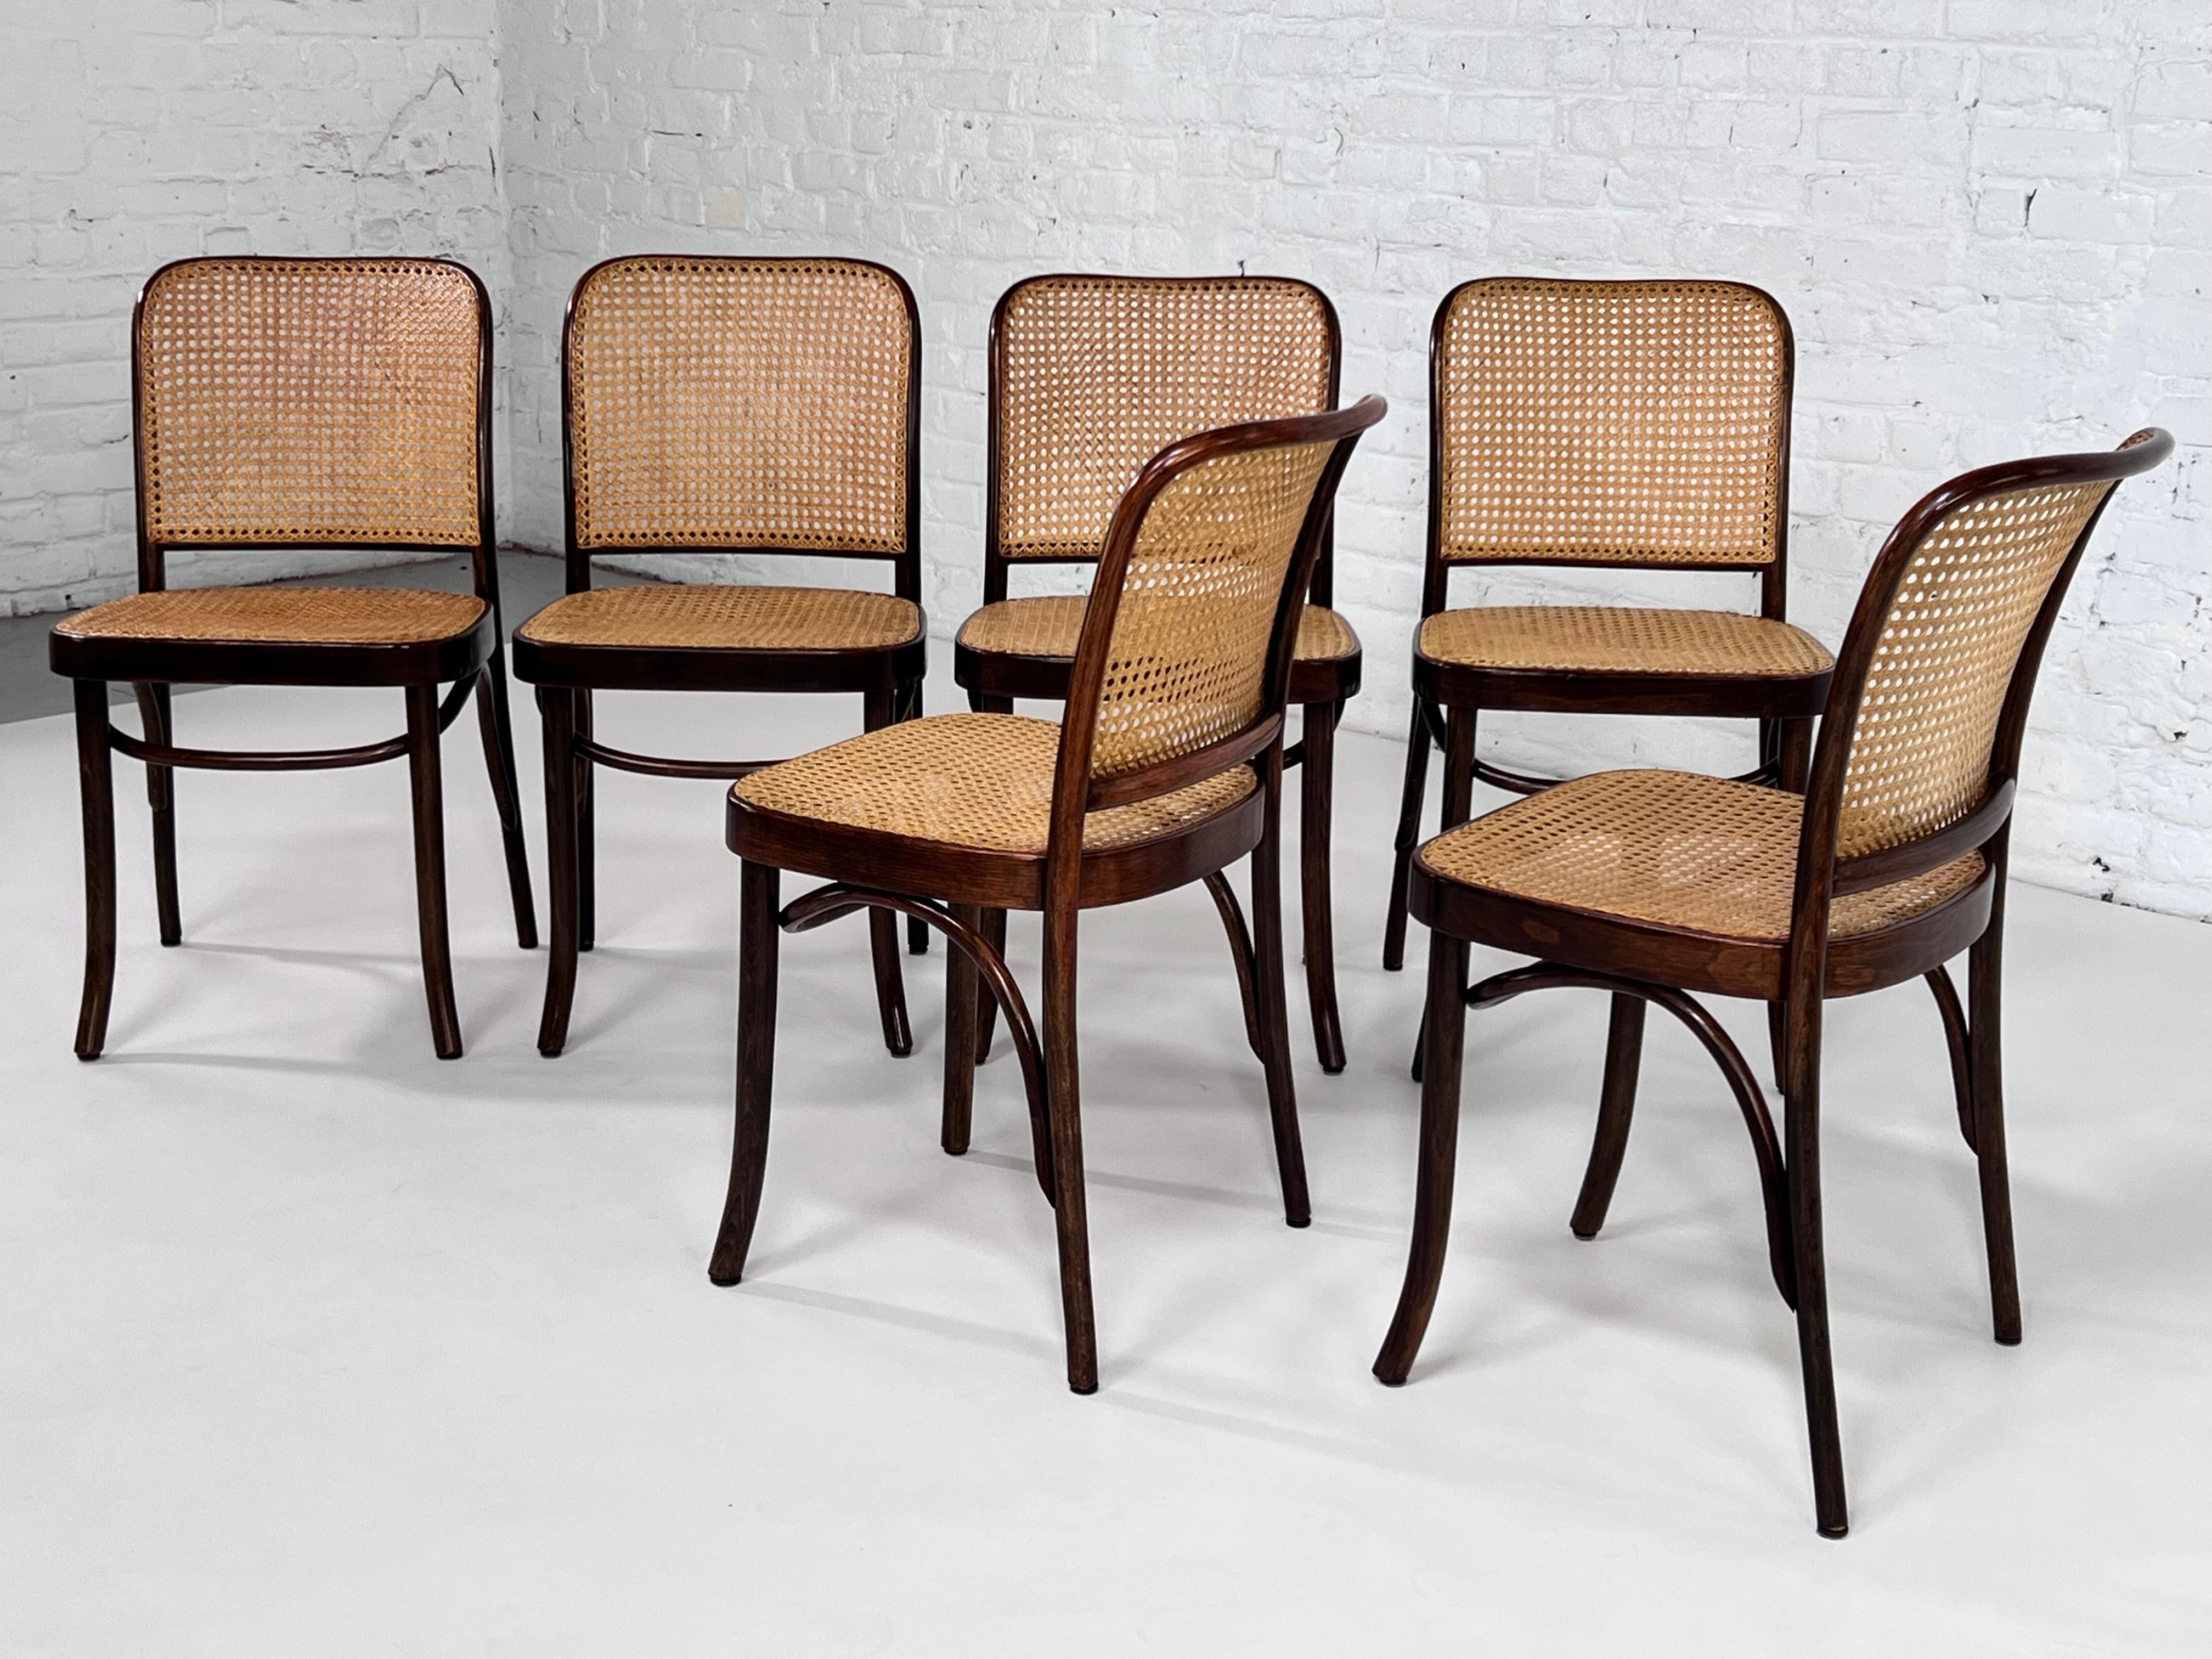 1920s Josef Hoffman design wood and cane set of 6 chairs Prague or 811 model for Thonet composed of a dark brown bentwood aerial structure and natural rattan wicker cane back and seat.